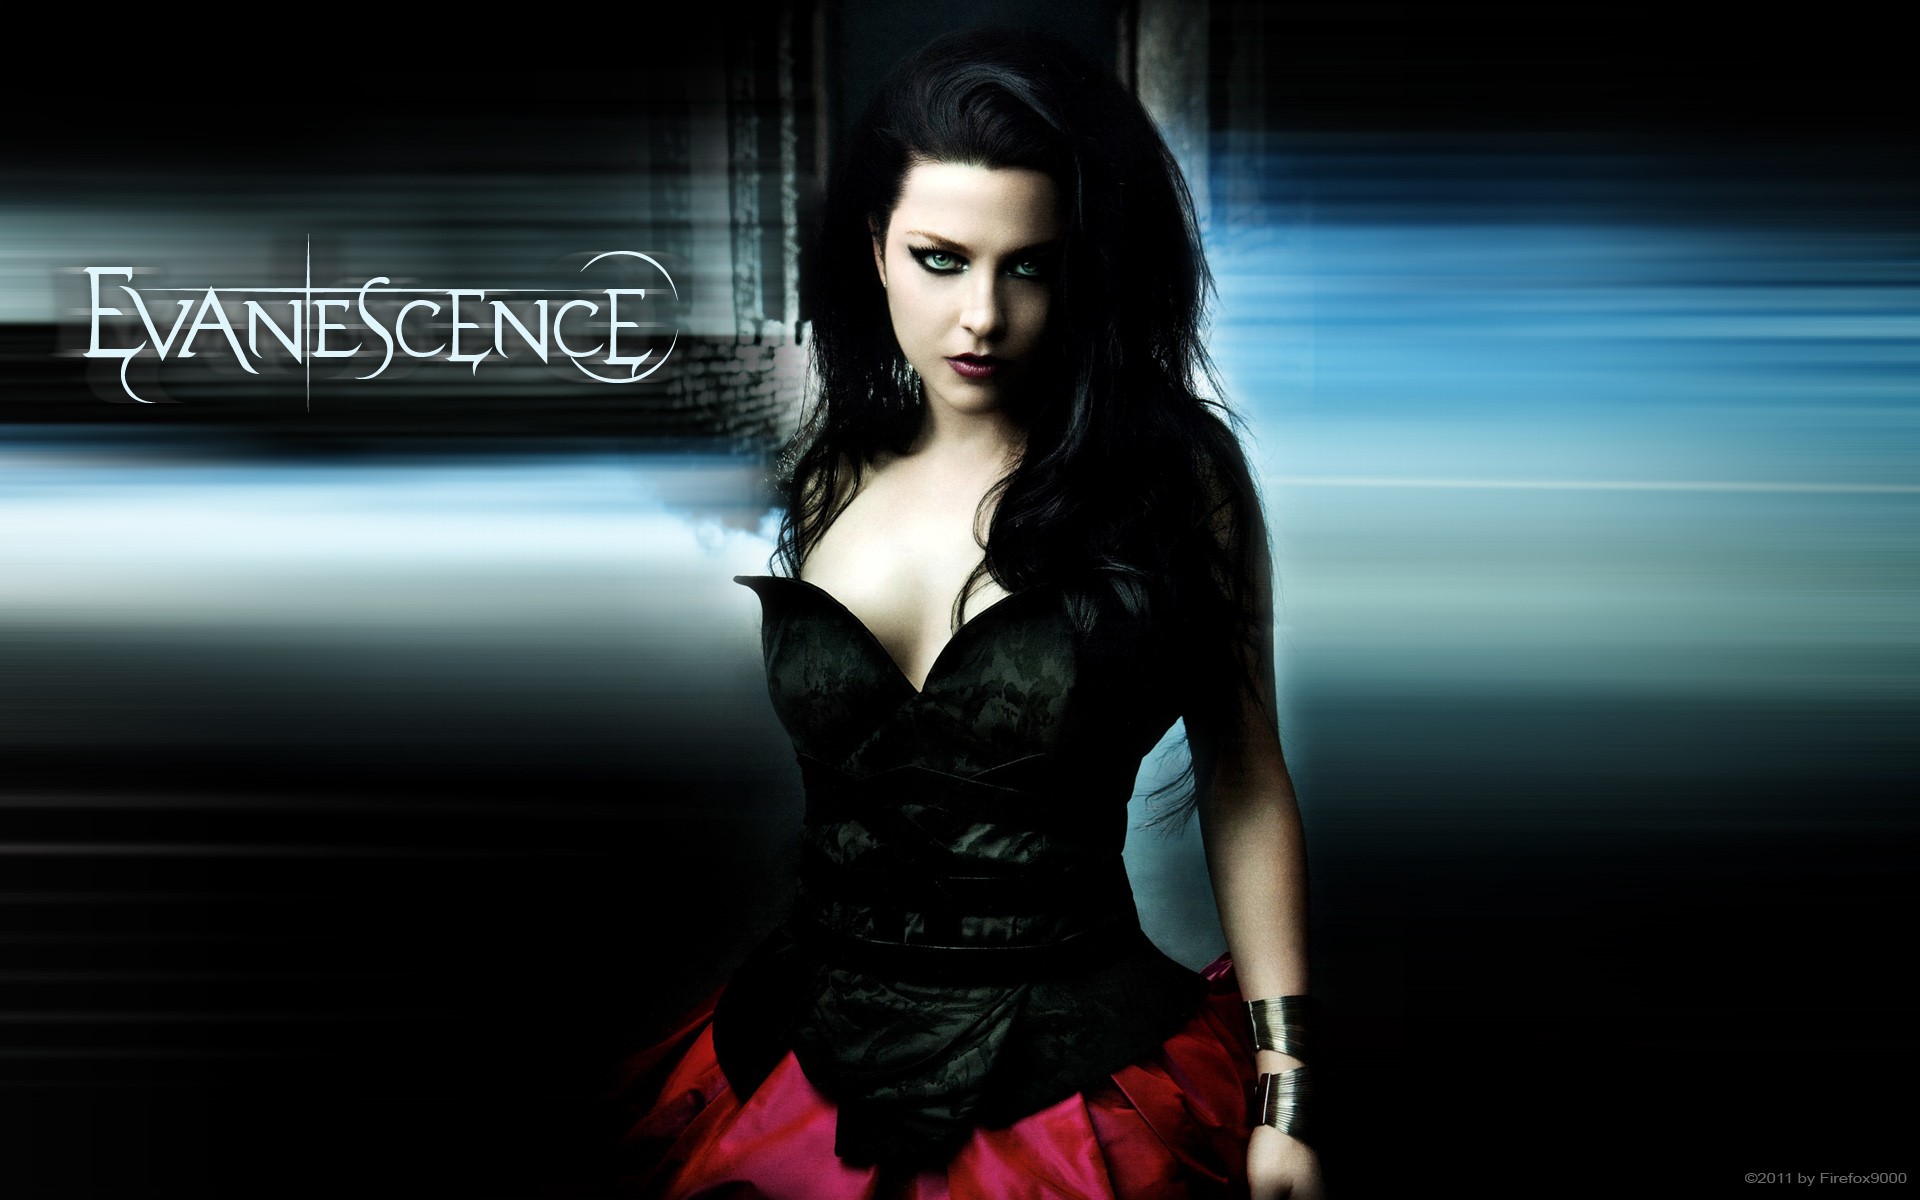 Nice Images Collection: Evanescence Desktop Wallpapers